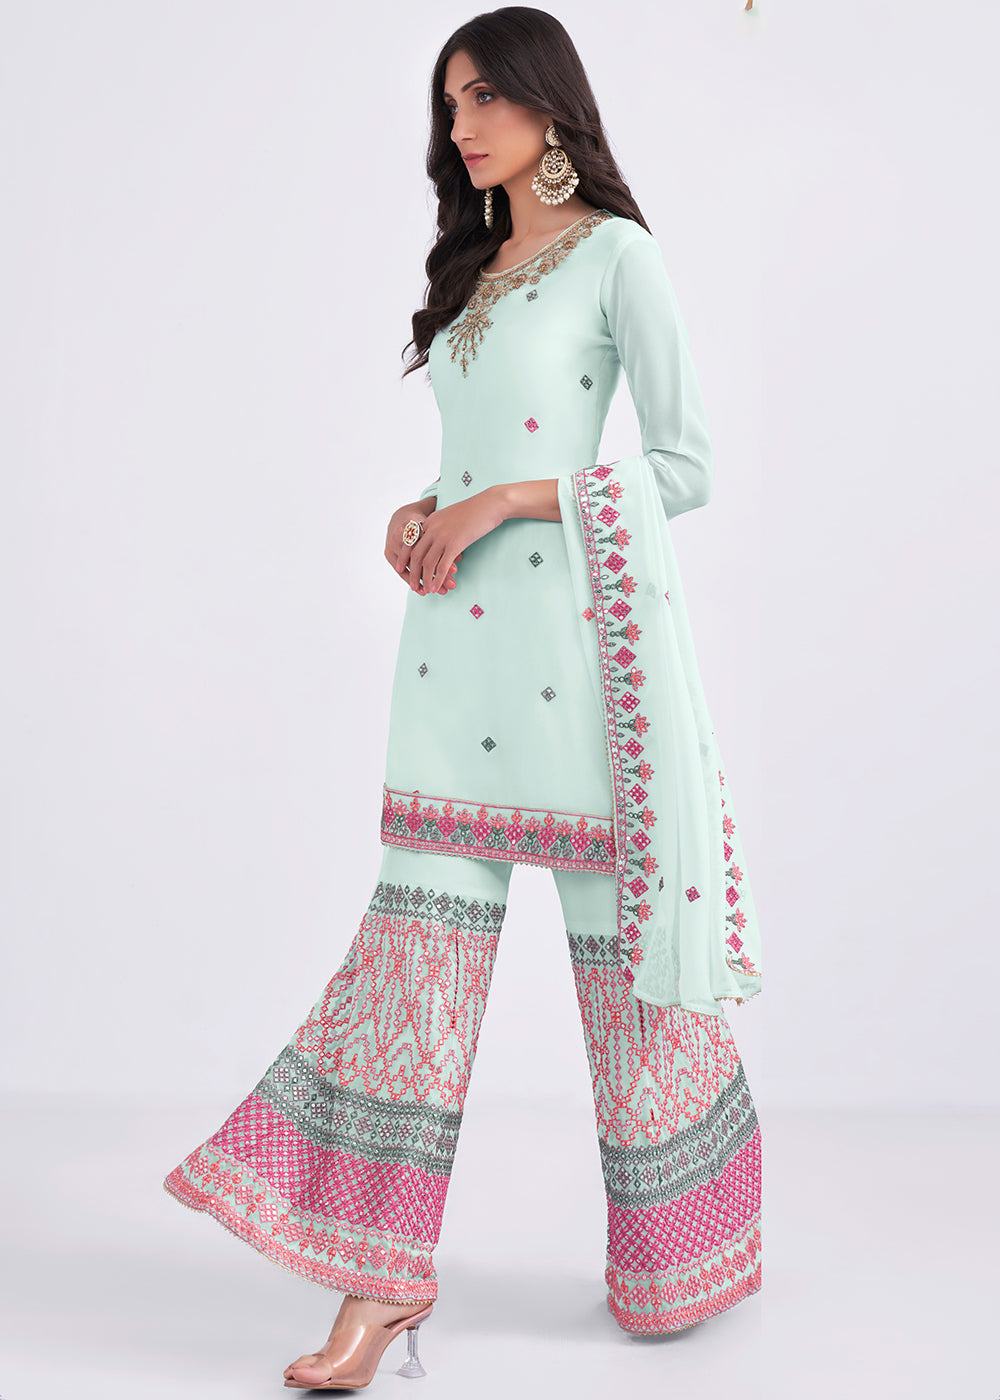 Shop Now Light Blue Sequins & Multi Thread Work Designer Sharara Suit Online at Empress Clothing in USA, UK, Canada, Germany & Worldwide. 